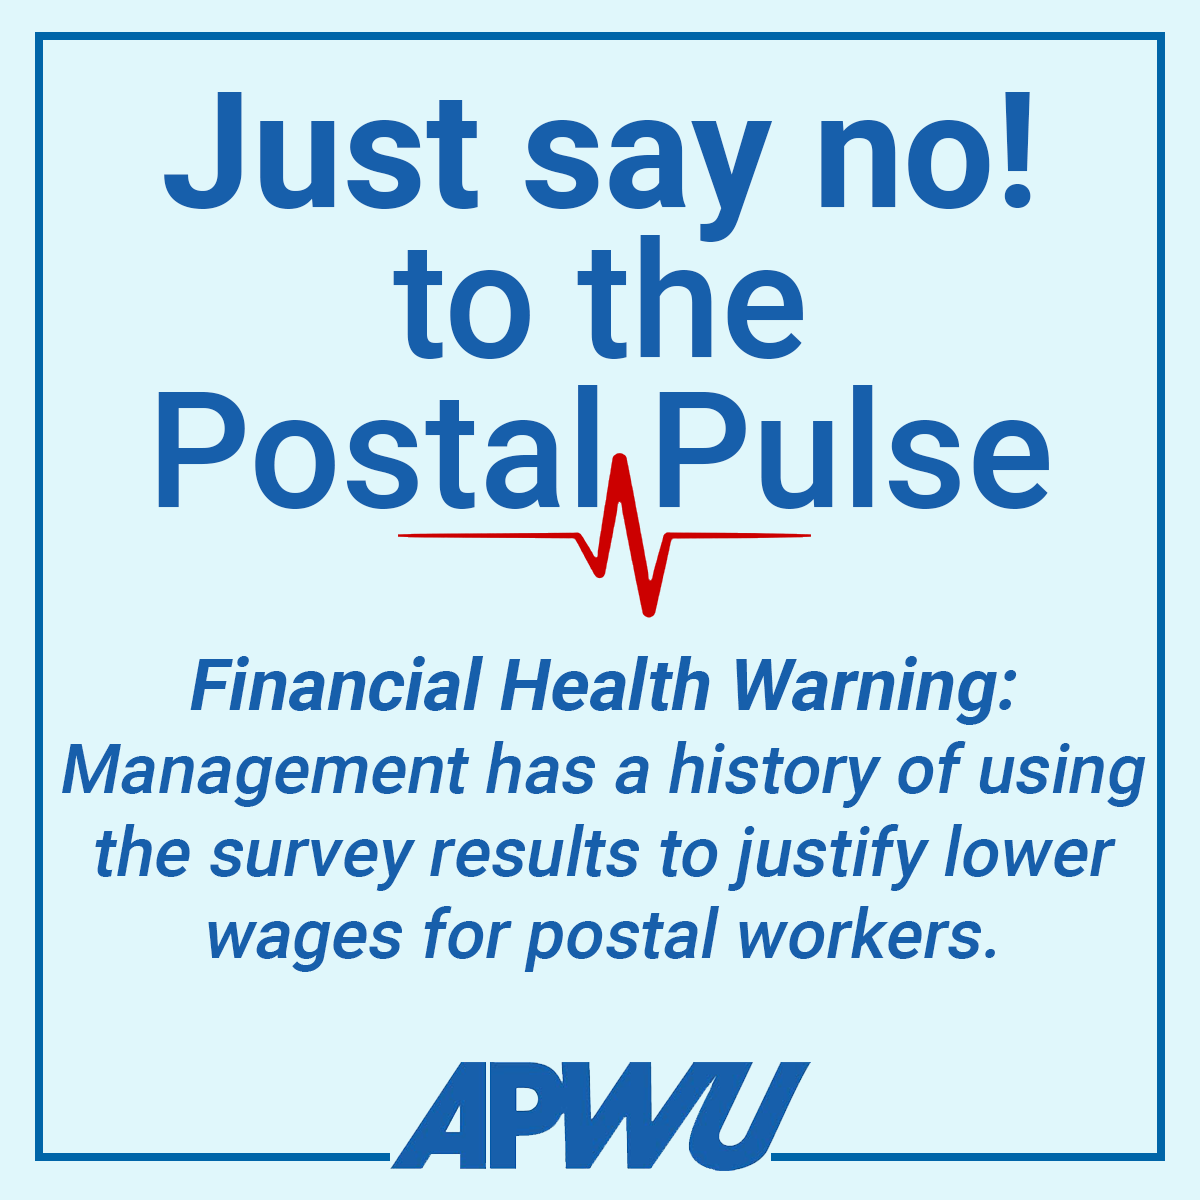 Just say no to the postal pulse. Financial Health Warning: Management has a history of using the survey results to justify lower wages for postal workers.